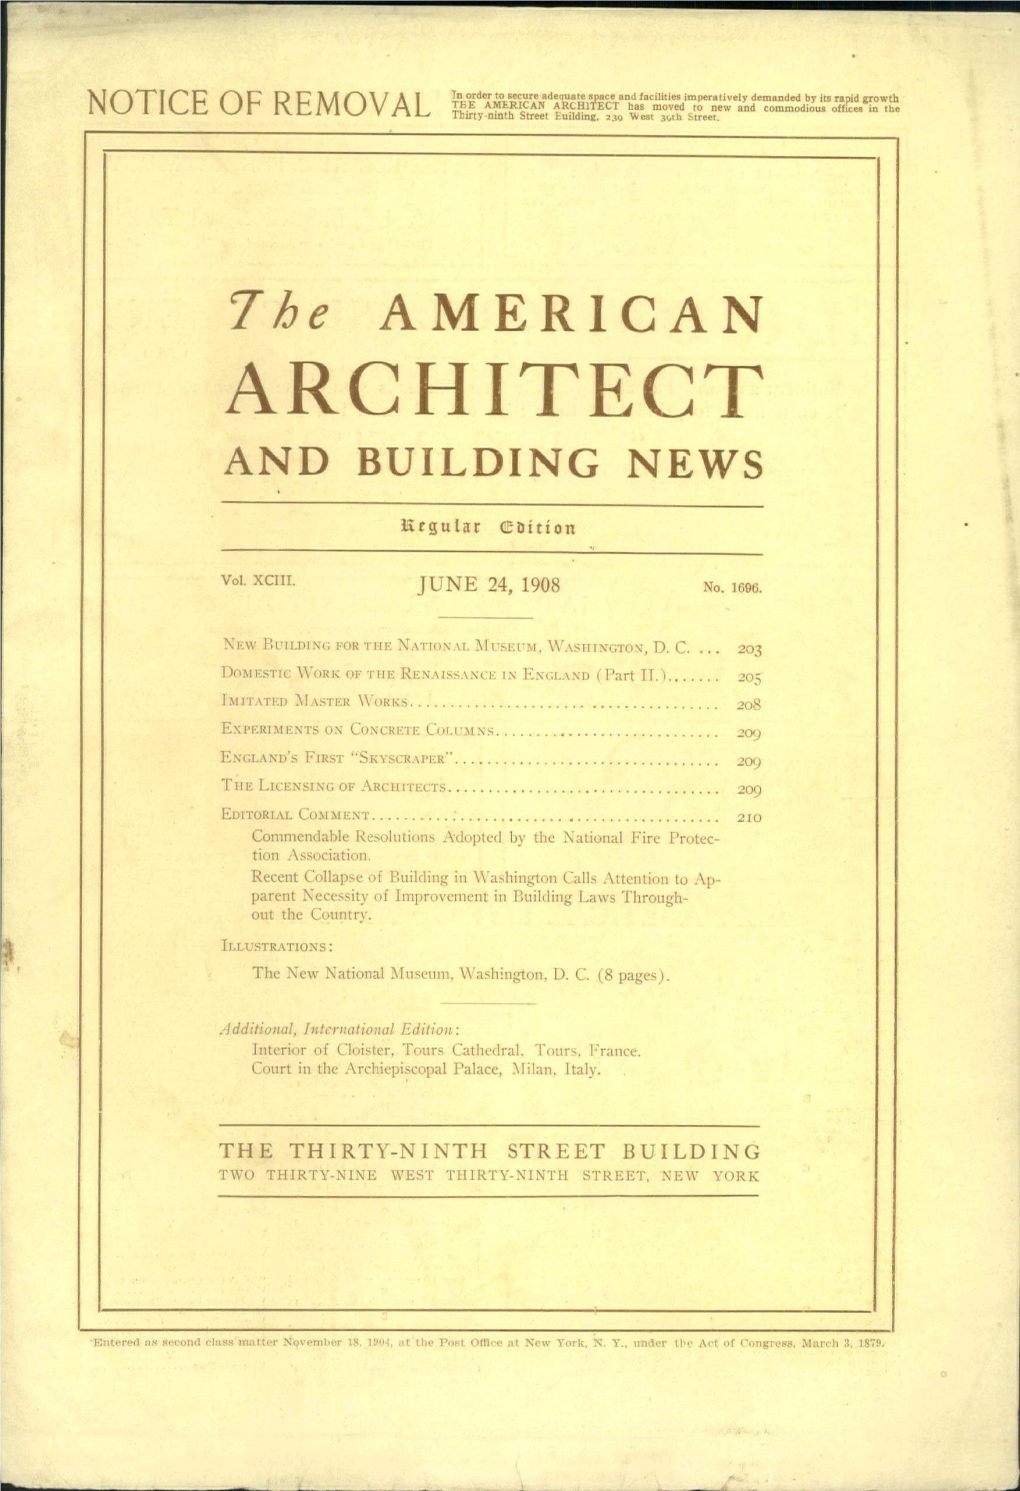 7He AMERICAN ARCHITECT and BUILDING NEWS